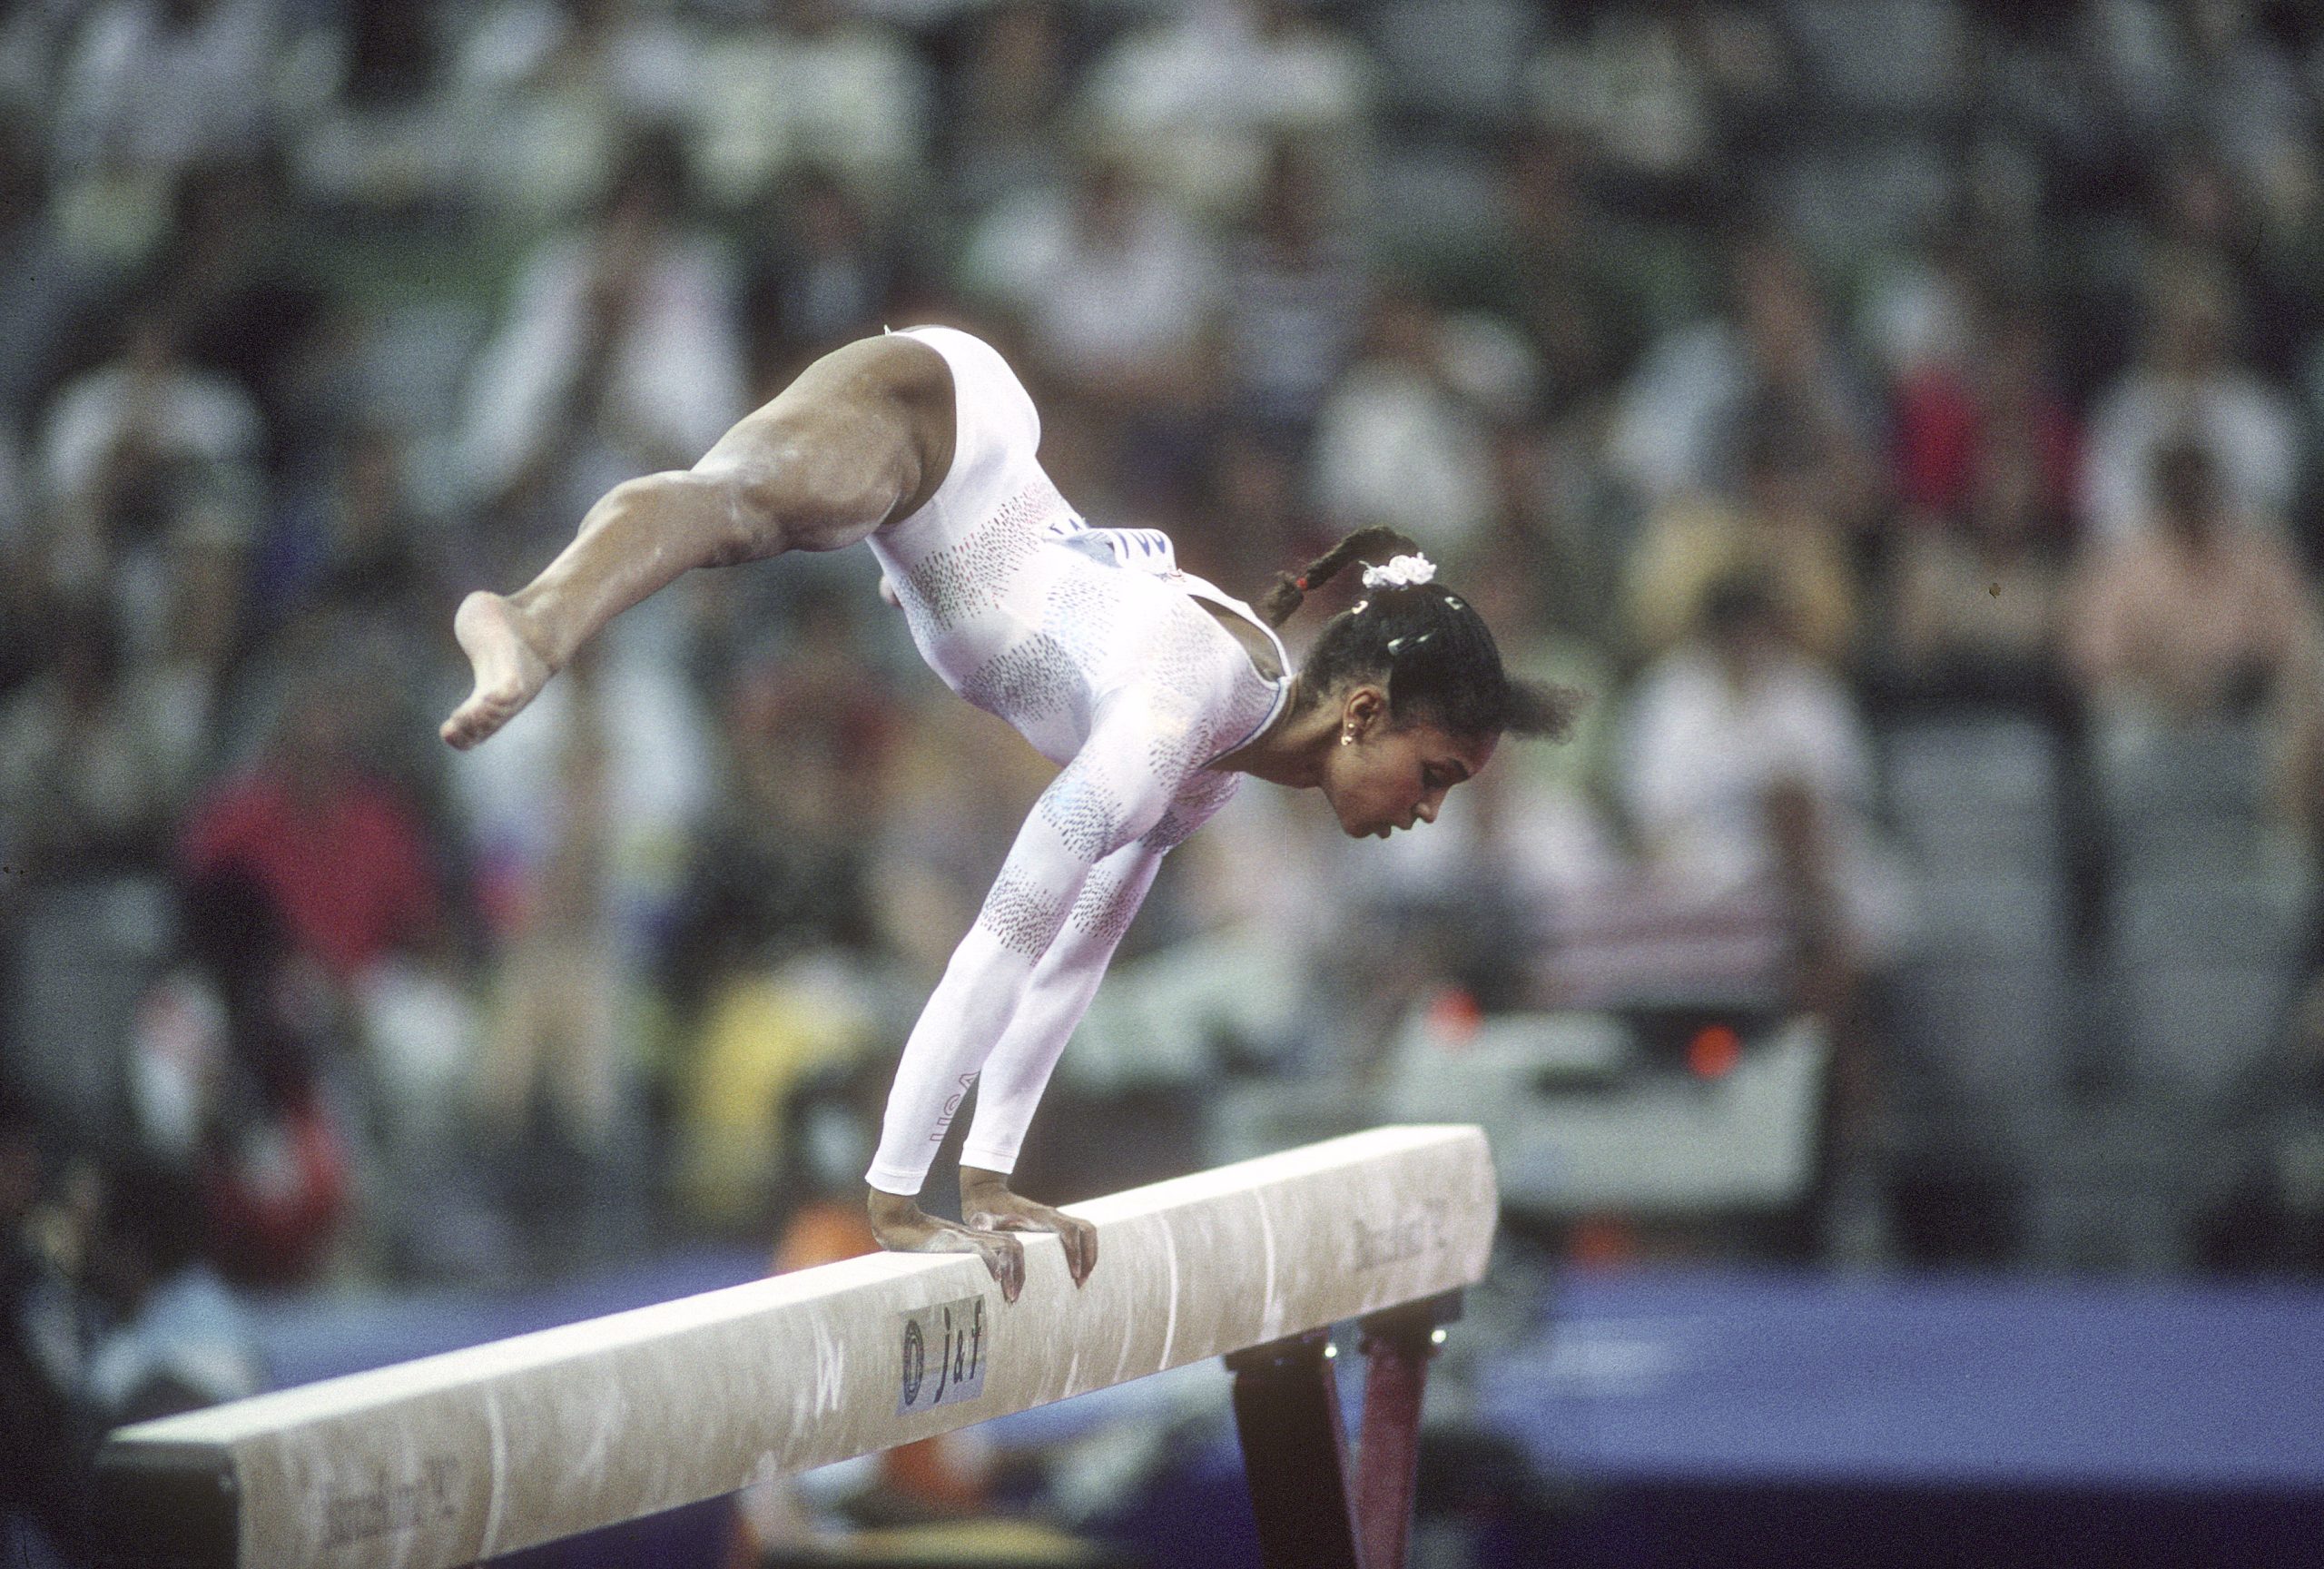 Celebrating Dominique Dawes, The First African-American To Win An Olympic Gold Medal In Gymnastics